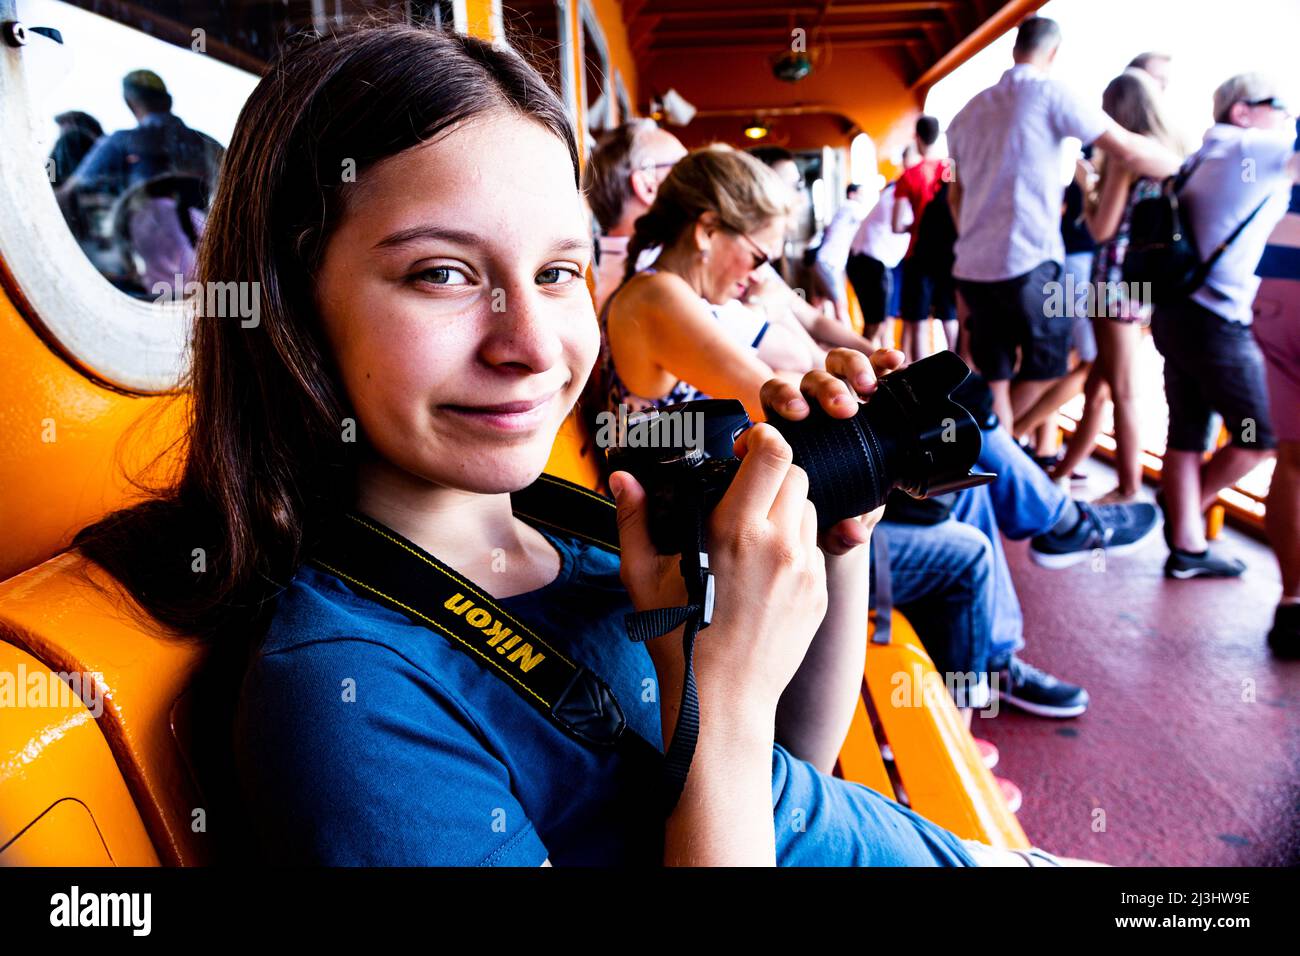 New York City, NY, USA, 14 years old, caucasian teenager girl with brown hair on the staten Island ferry Stock Photo